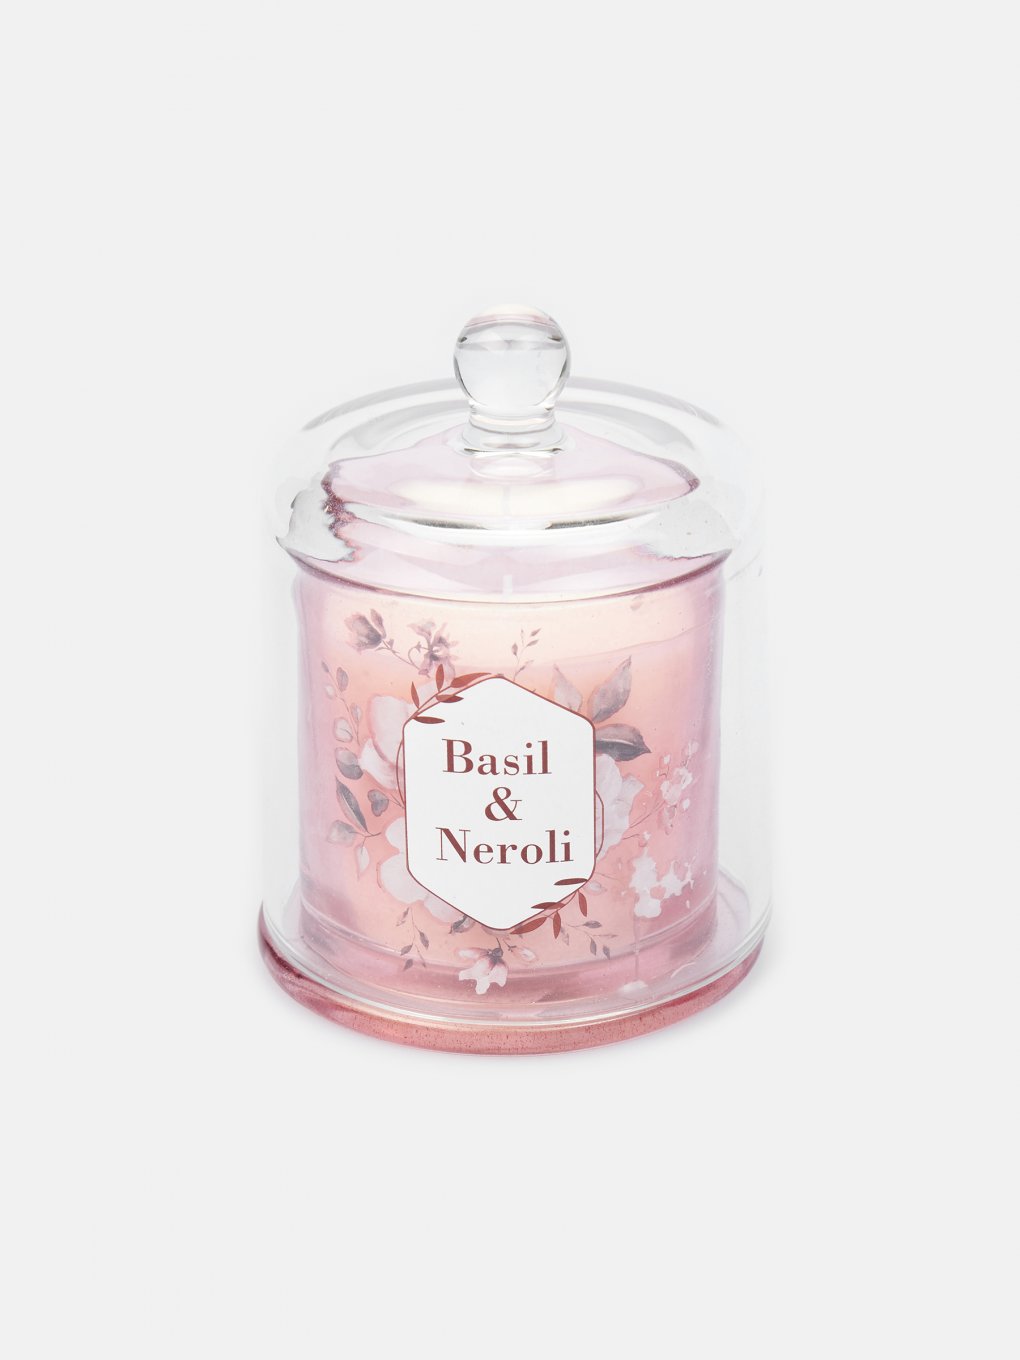 Basil and neroli scented candle